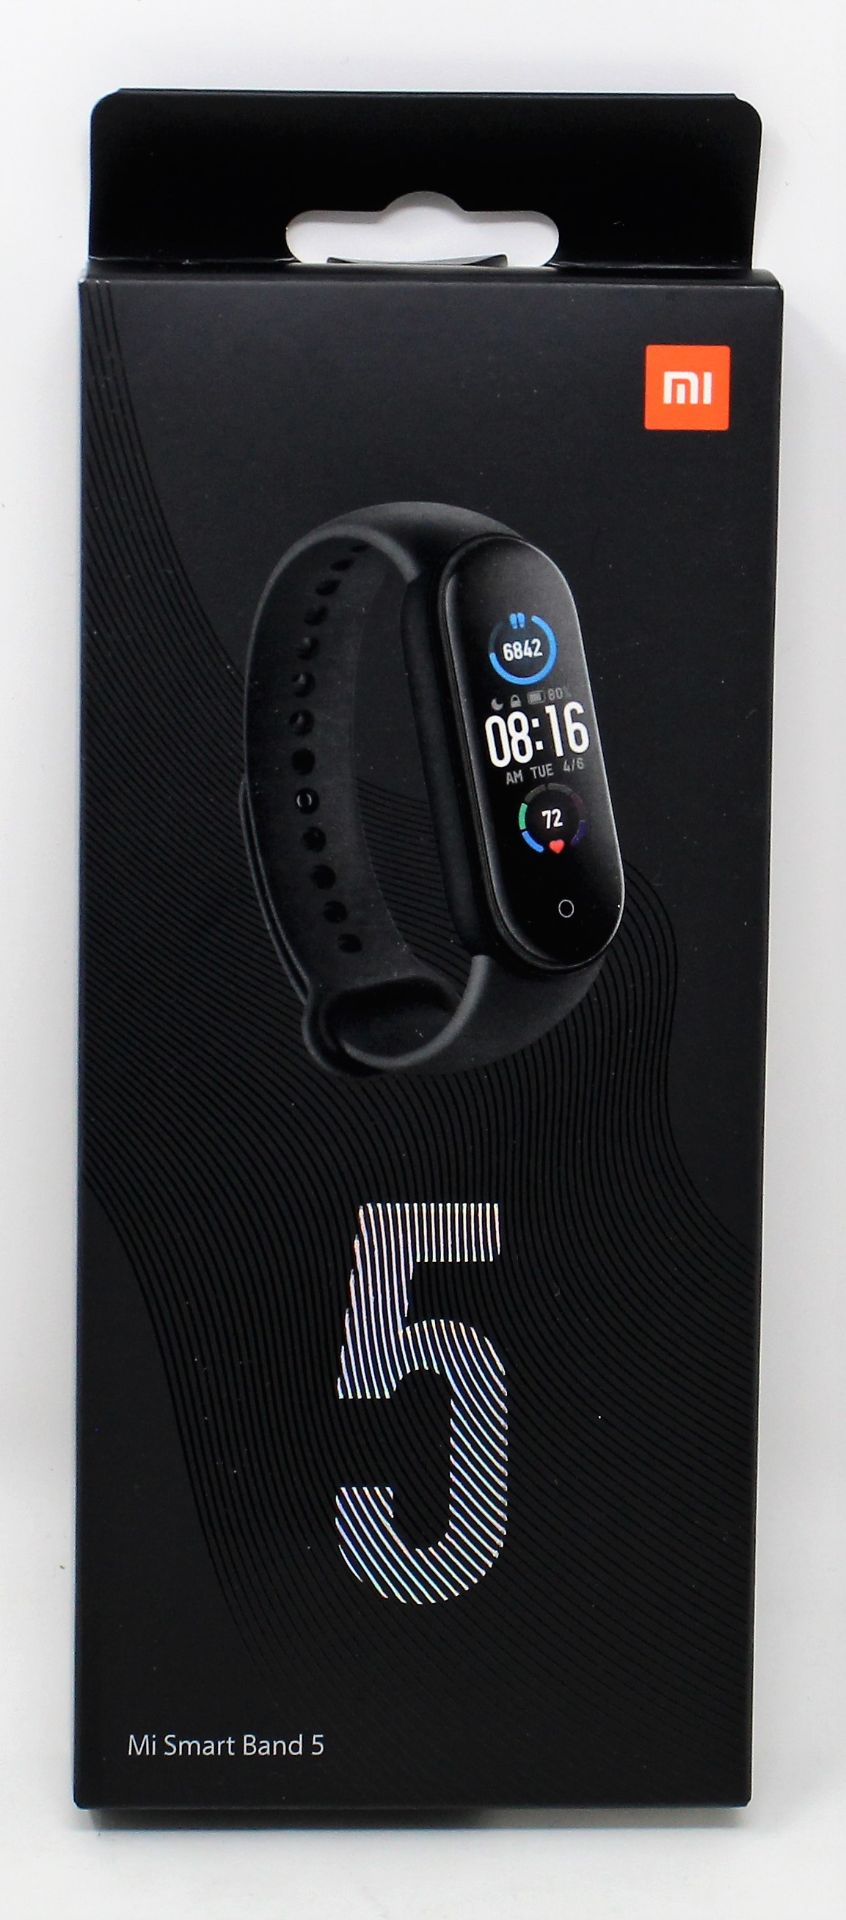 Ten boxed as new Xiaomi Mi Band 5 Fitness Trackers in Black (Boxes sealed).